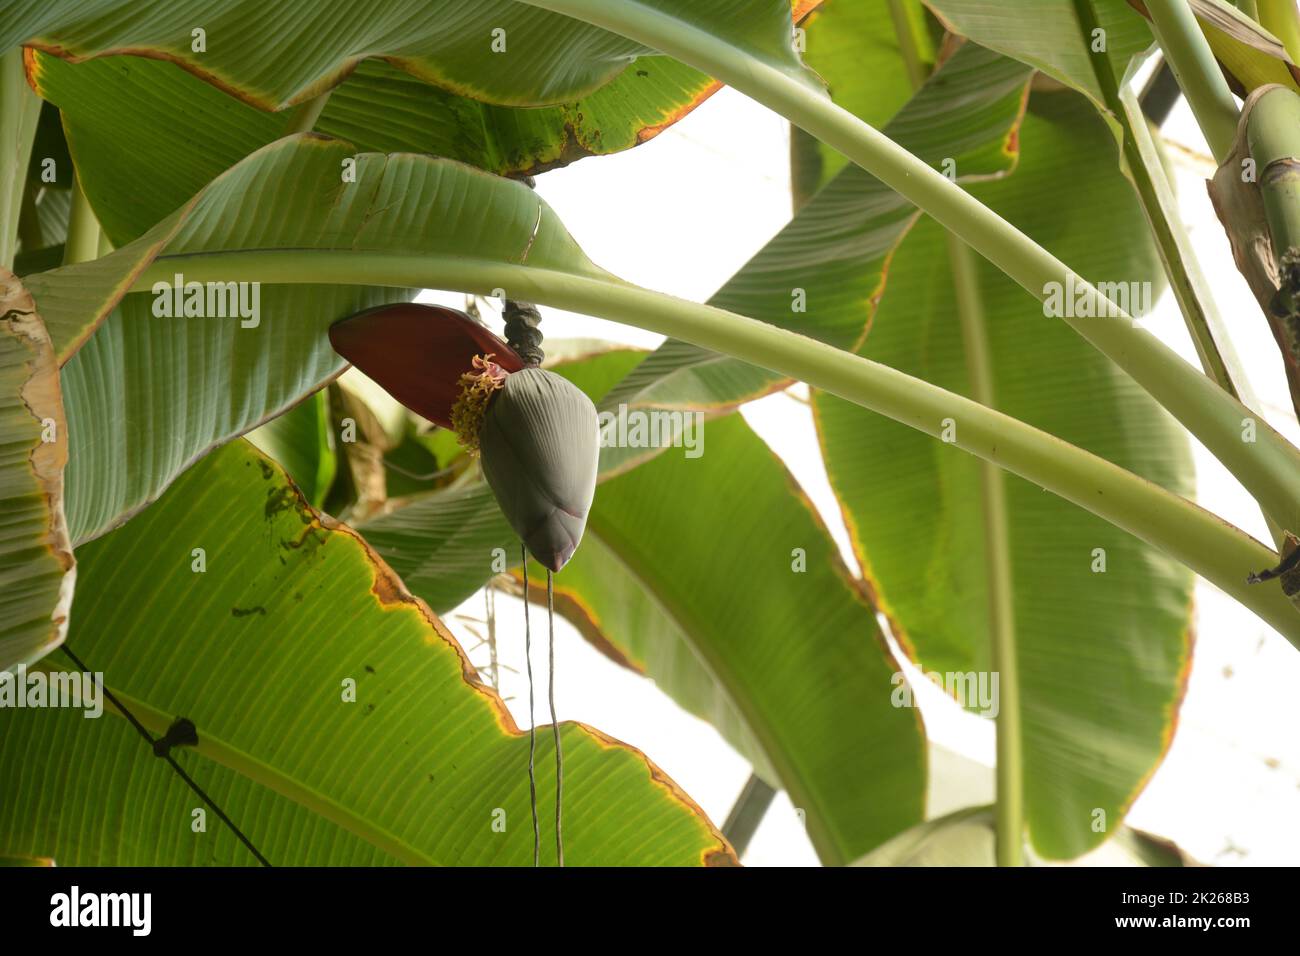 Flower bud of banana tree with a bunch of bananas in Utopia Orchid Park, Israel Stock Photo